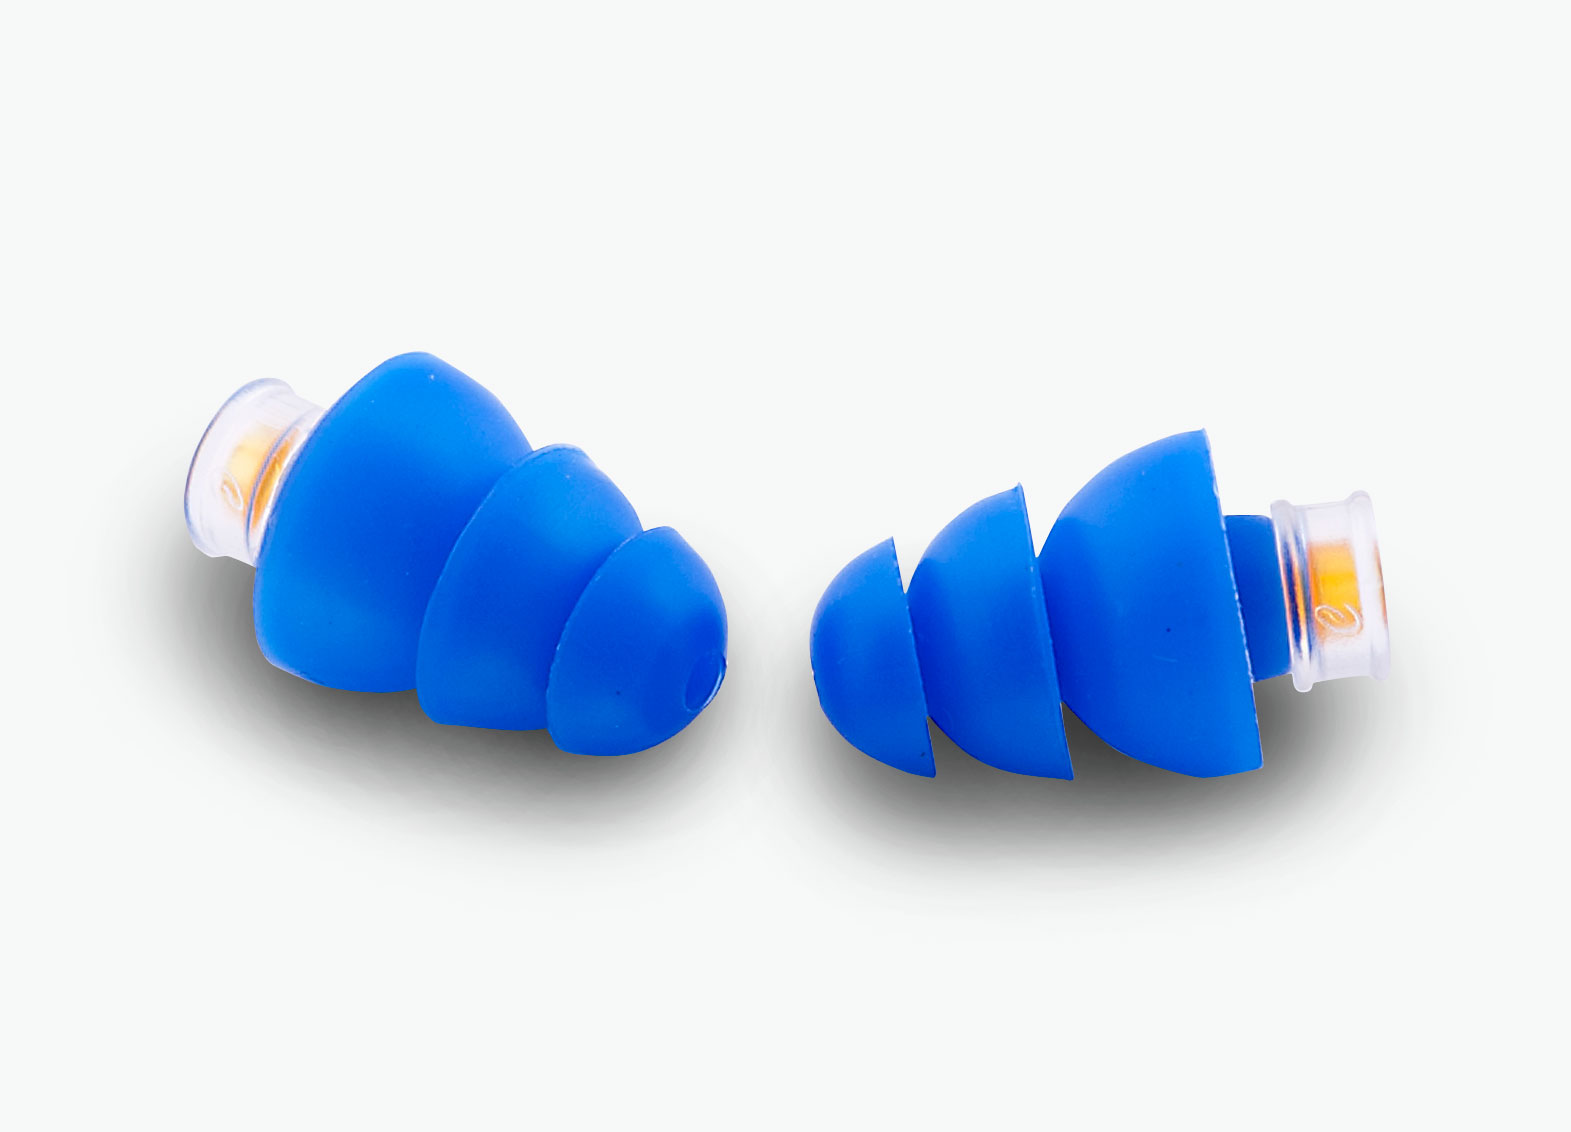 Professional Comfort Fit Ergonomics Non-Skid Surf Diving Bath Silicone Gel EarPlugs Protection for Adults and Children Insuwun Swimming Ear Plugs 